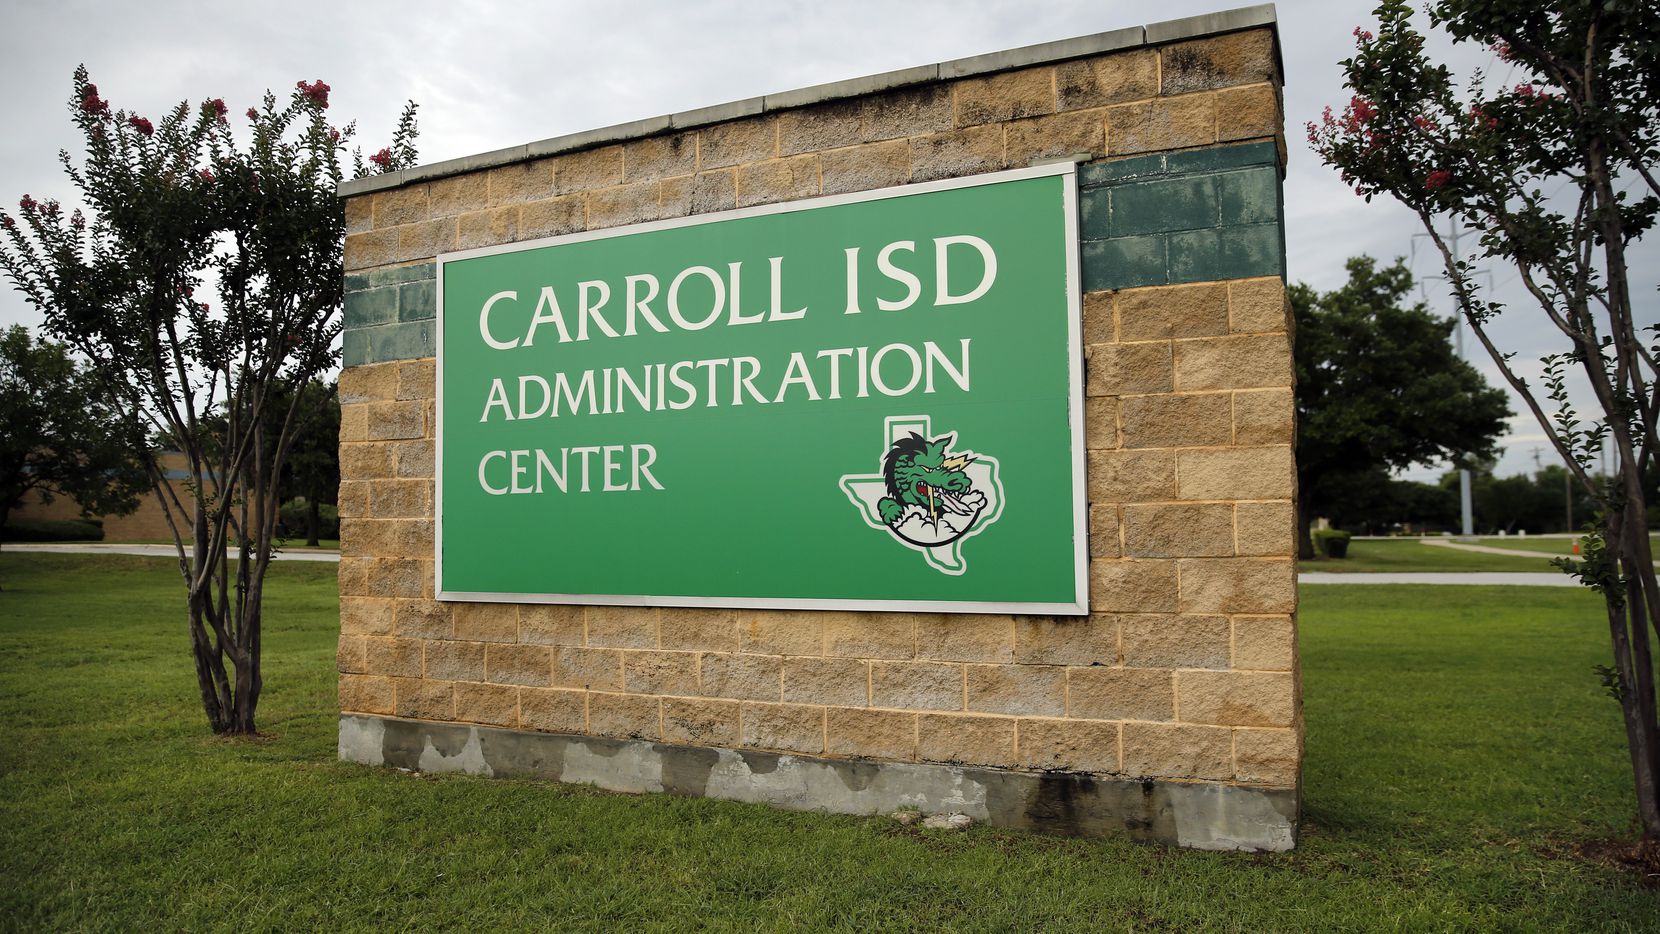 The Carroll ISD Administration Center in Southlake, Texas, Tuesday, June 23, 2020.